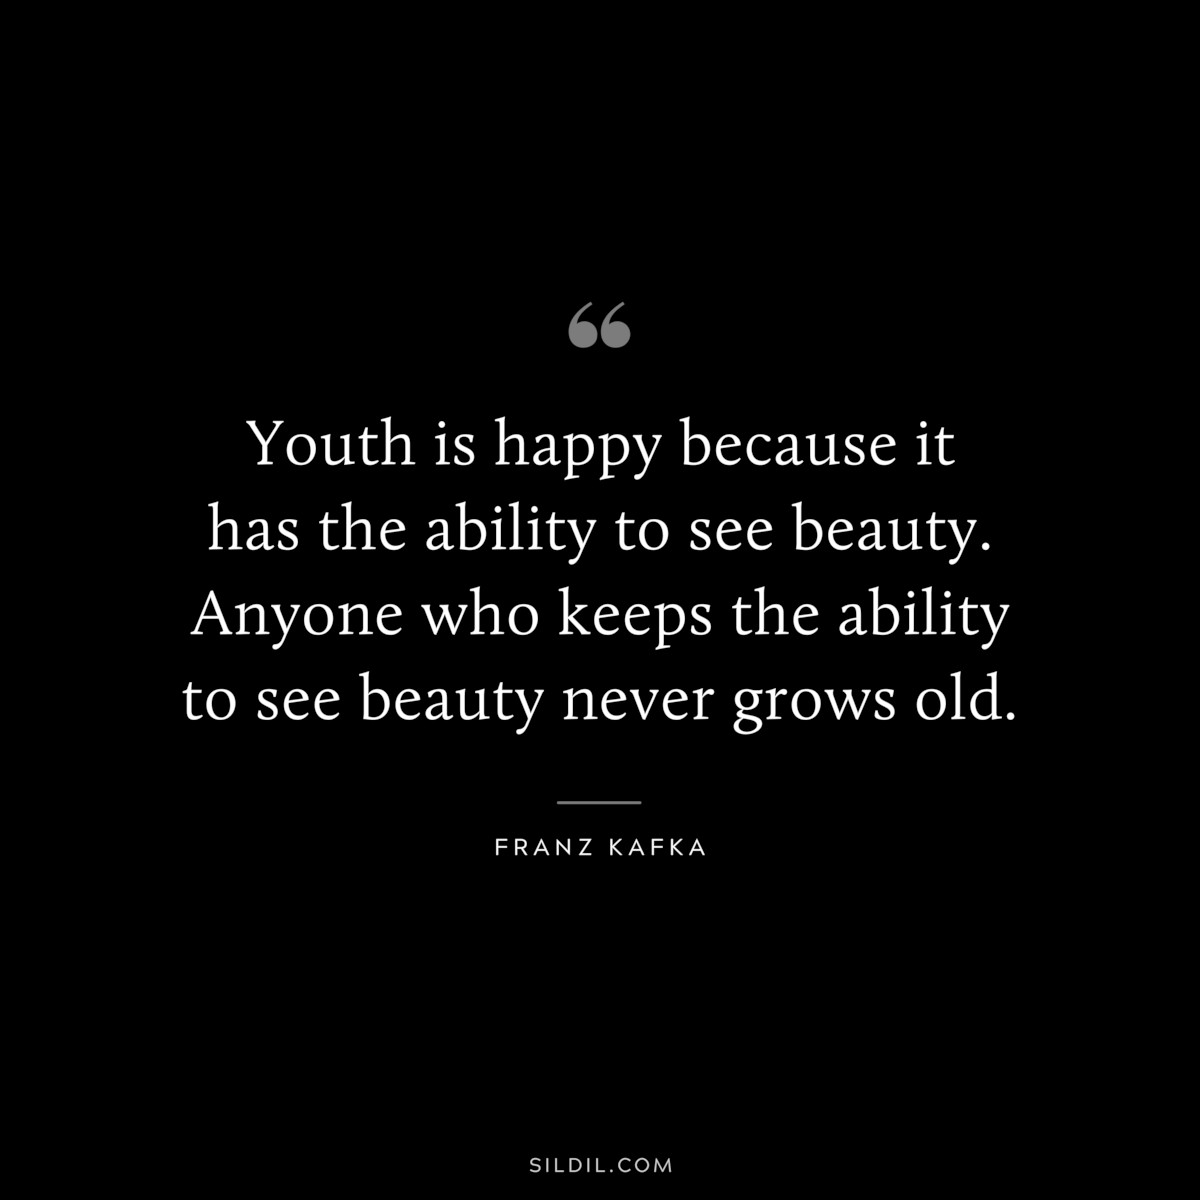 Youth is happy because it has the ability to see beauty. Anyone who keeps the ability to see beauty never grows old. ― Franz Kafka